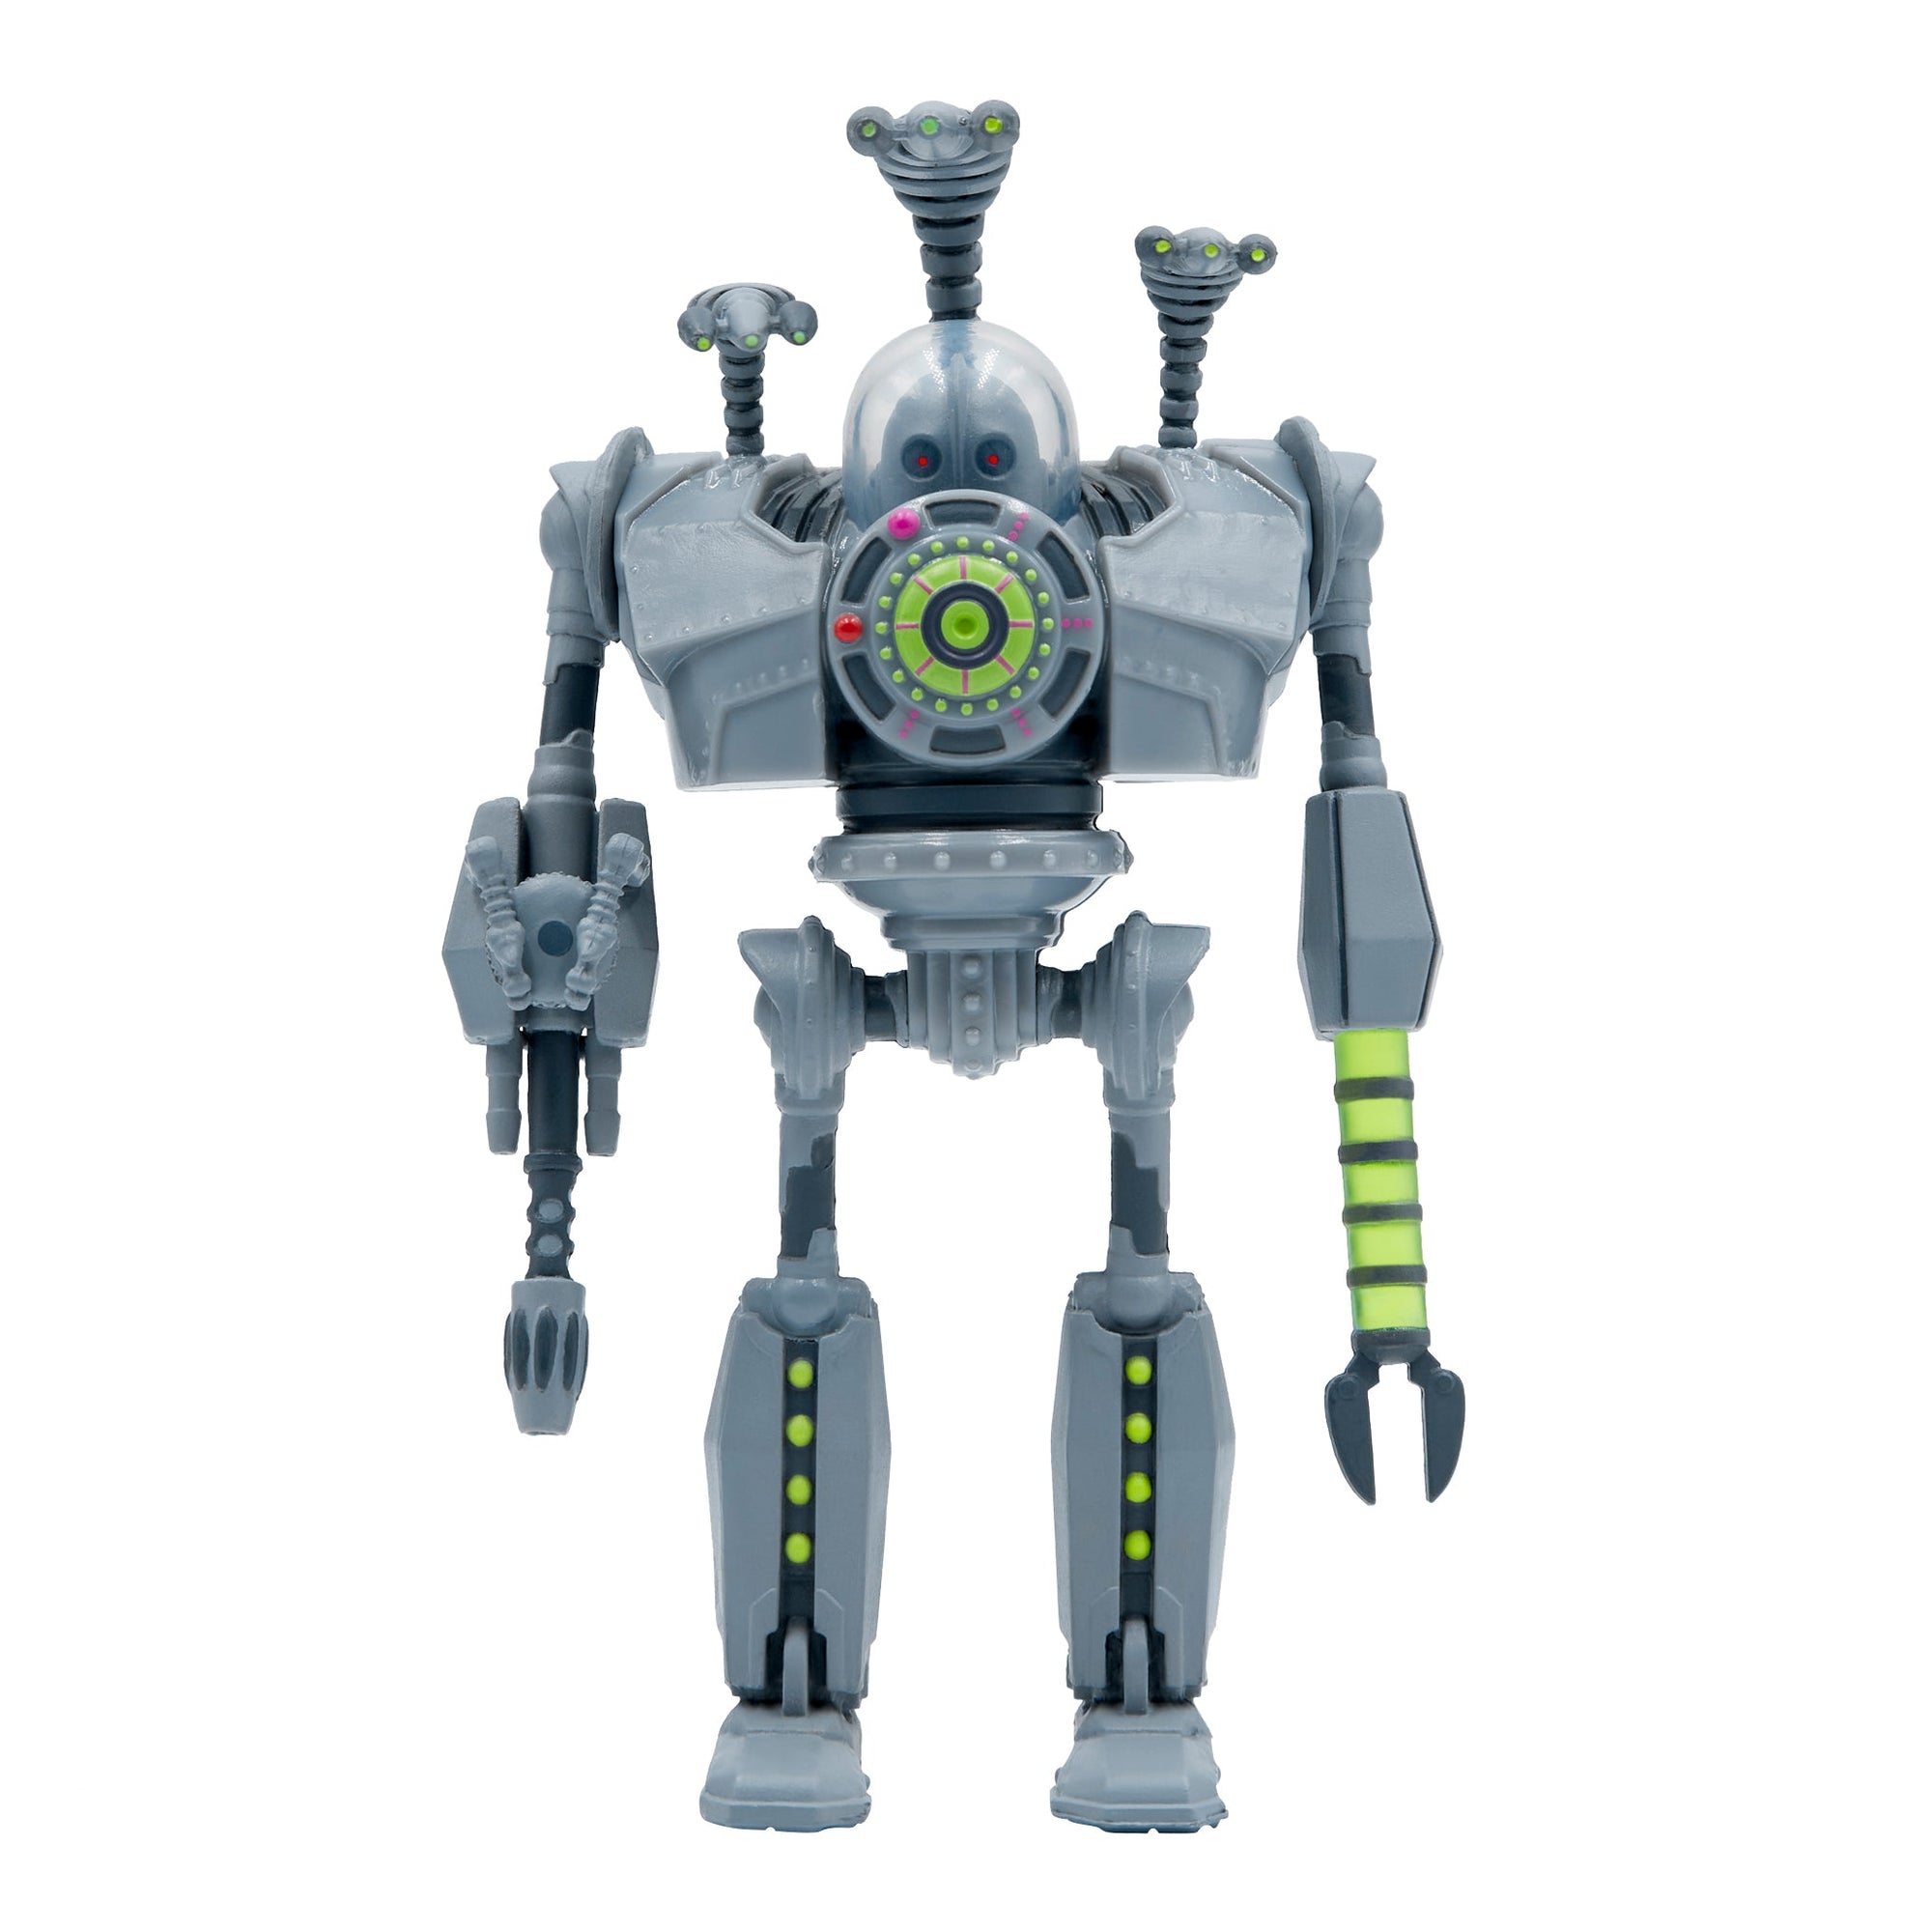 Attack Giant ReAction Figure - The Iron Giant by Super7